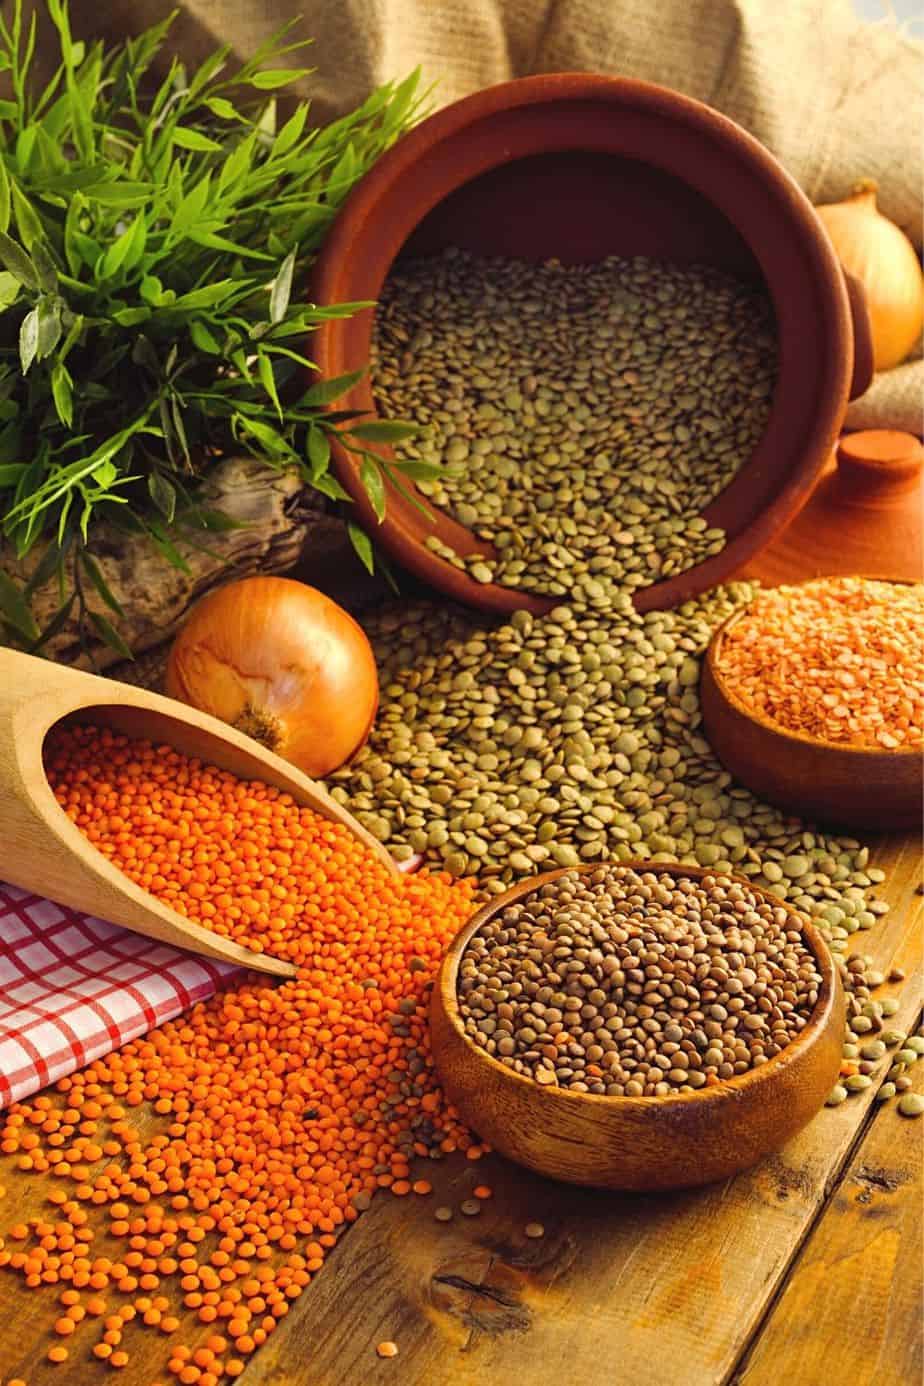 Lentils, small-sized vegetables, grow well in raised beds in the right growing conditions